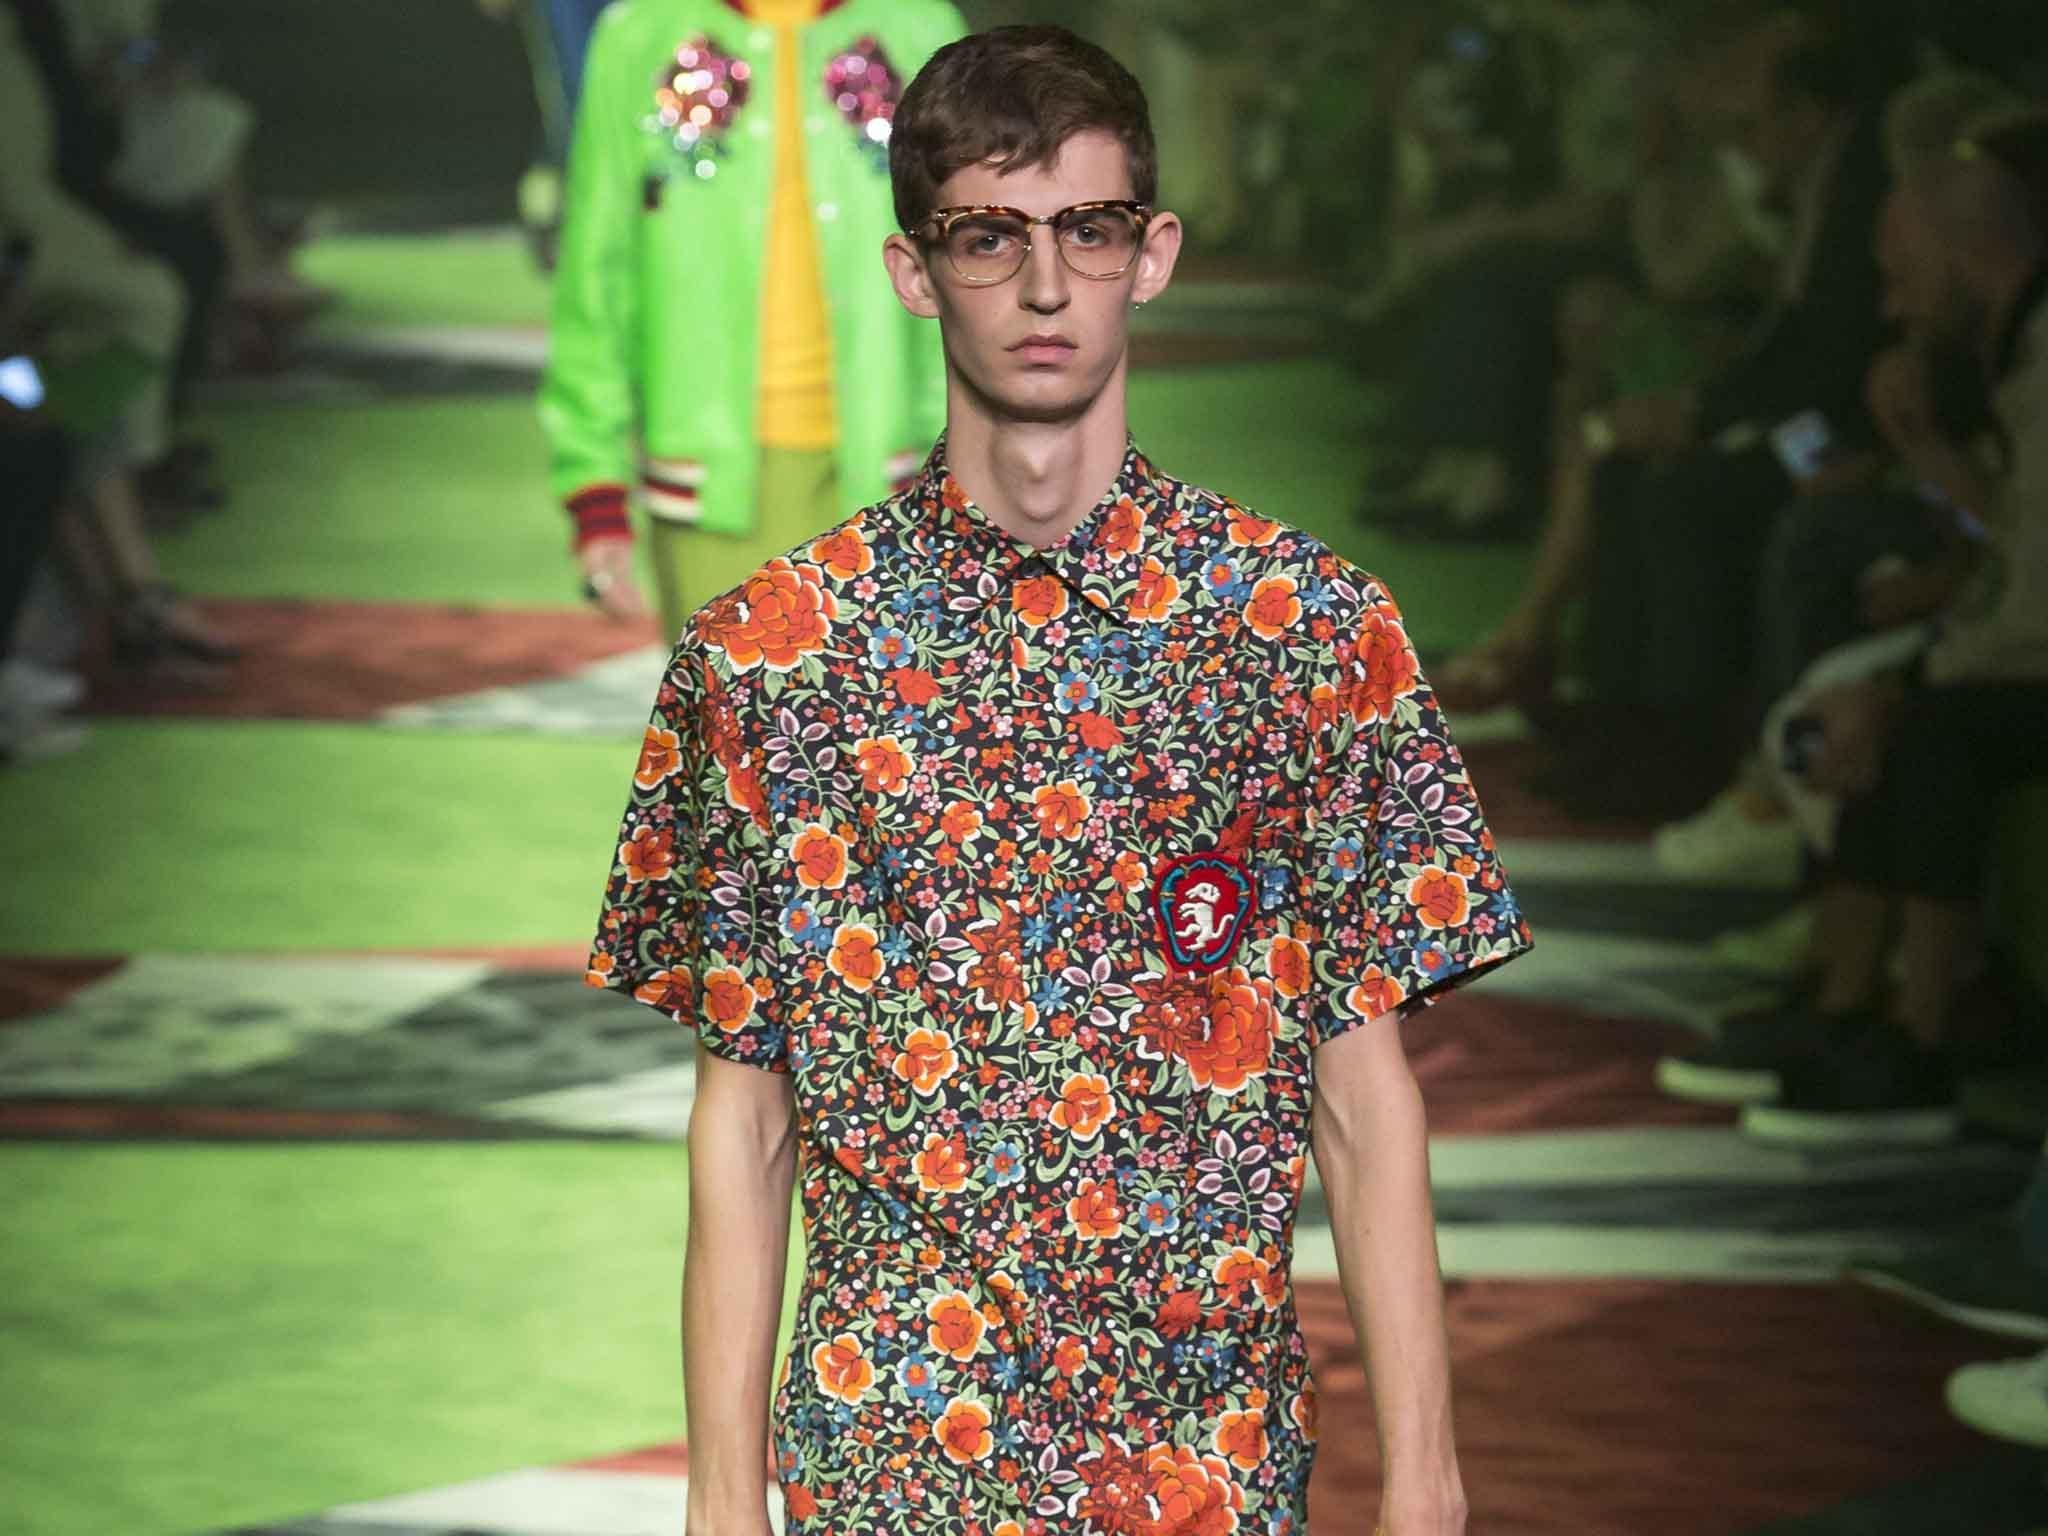 A printed shirt like this Gucci spring line piece is a definite head turner